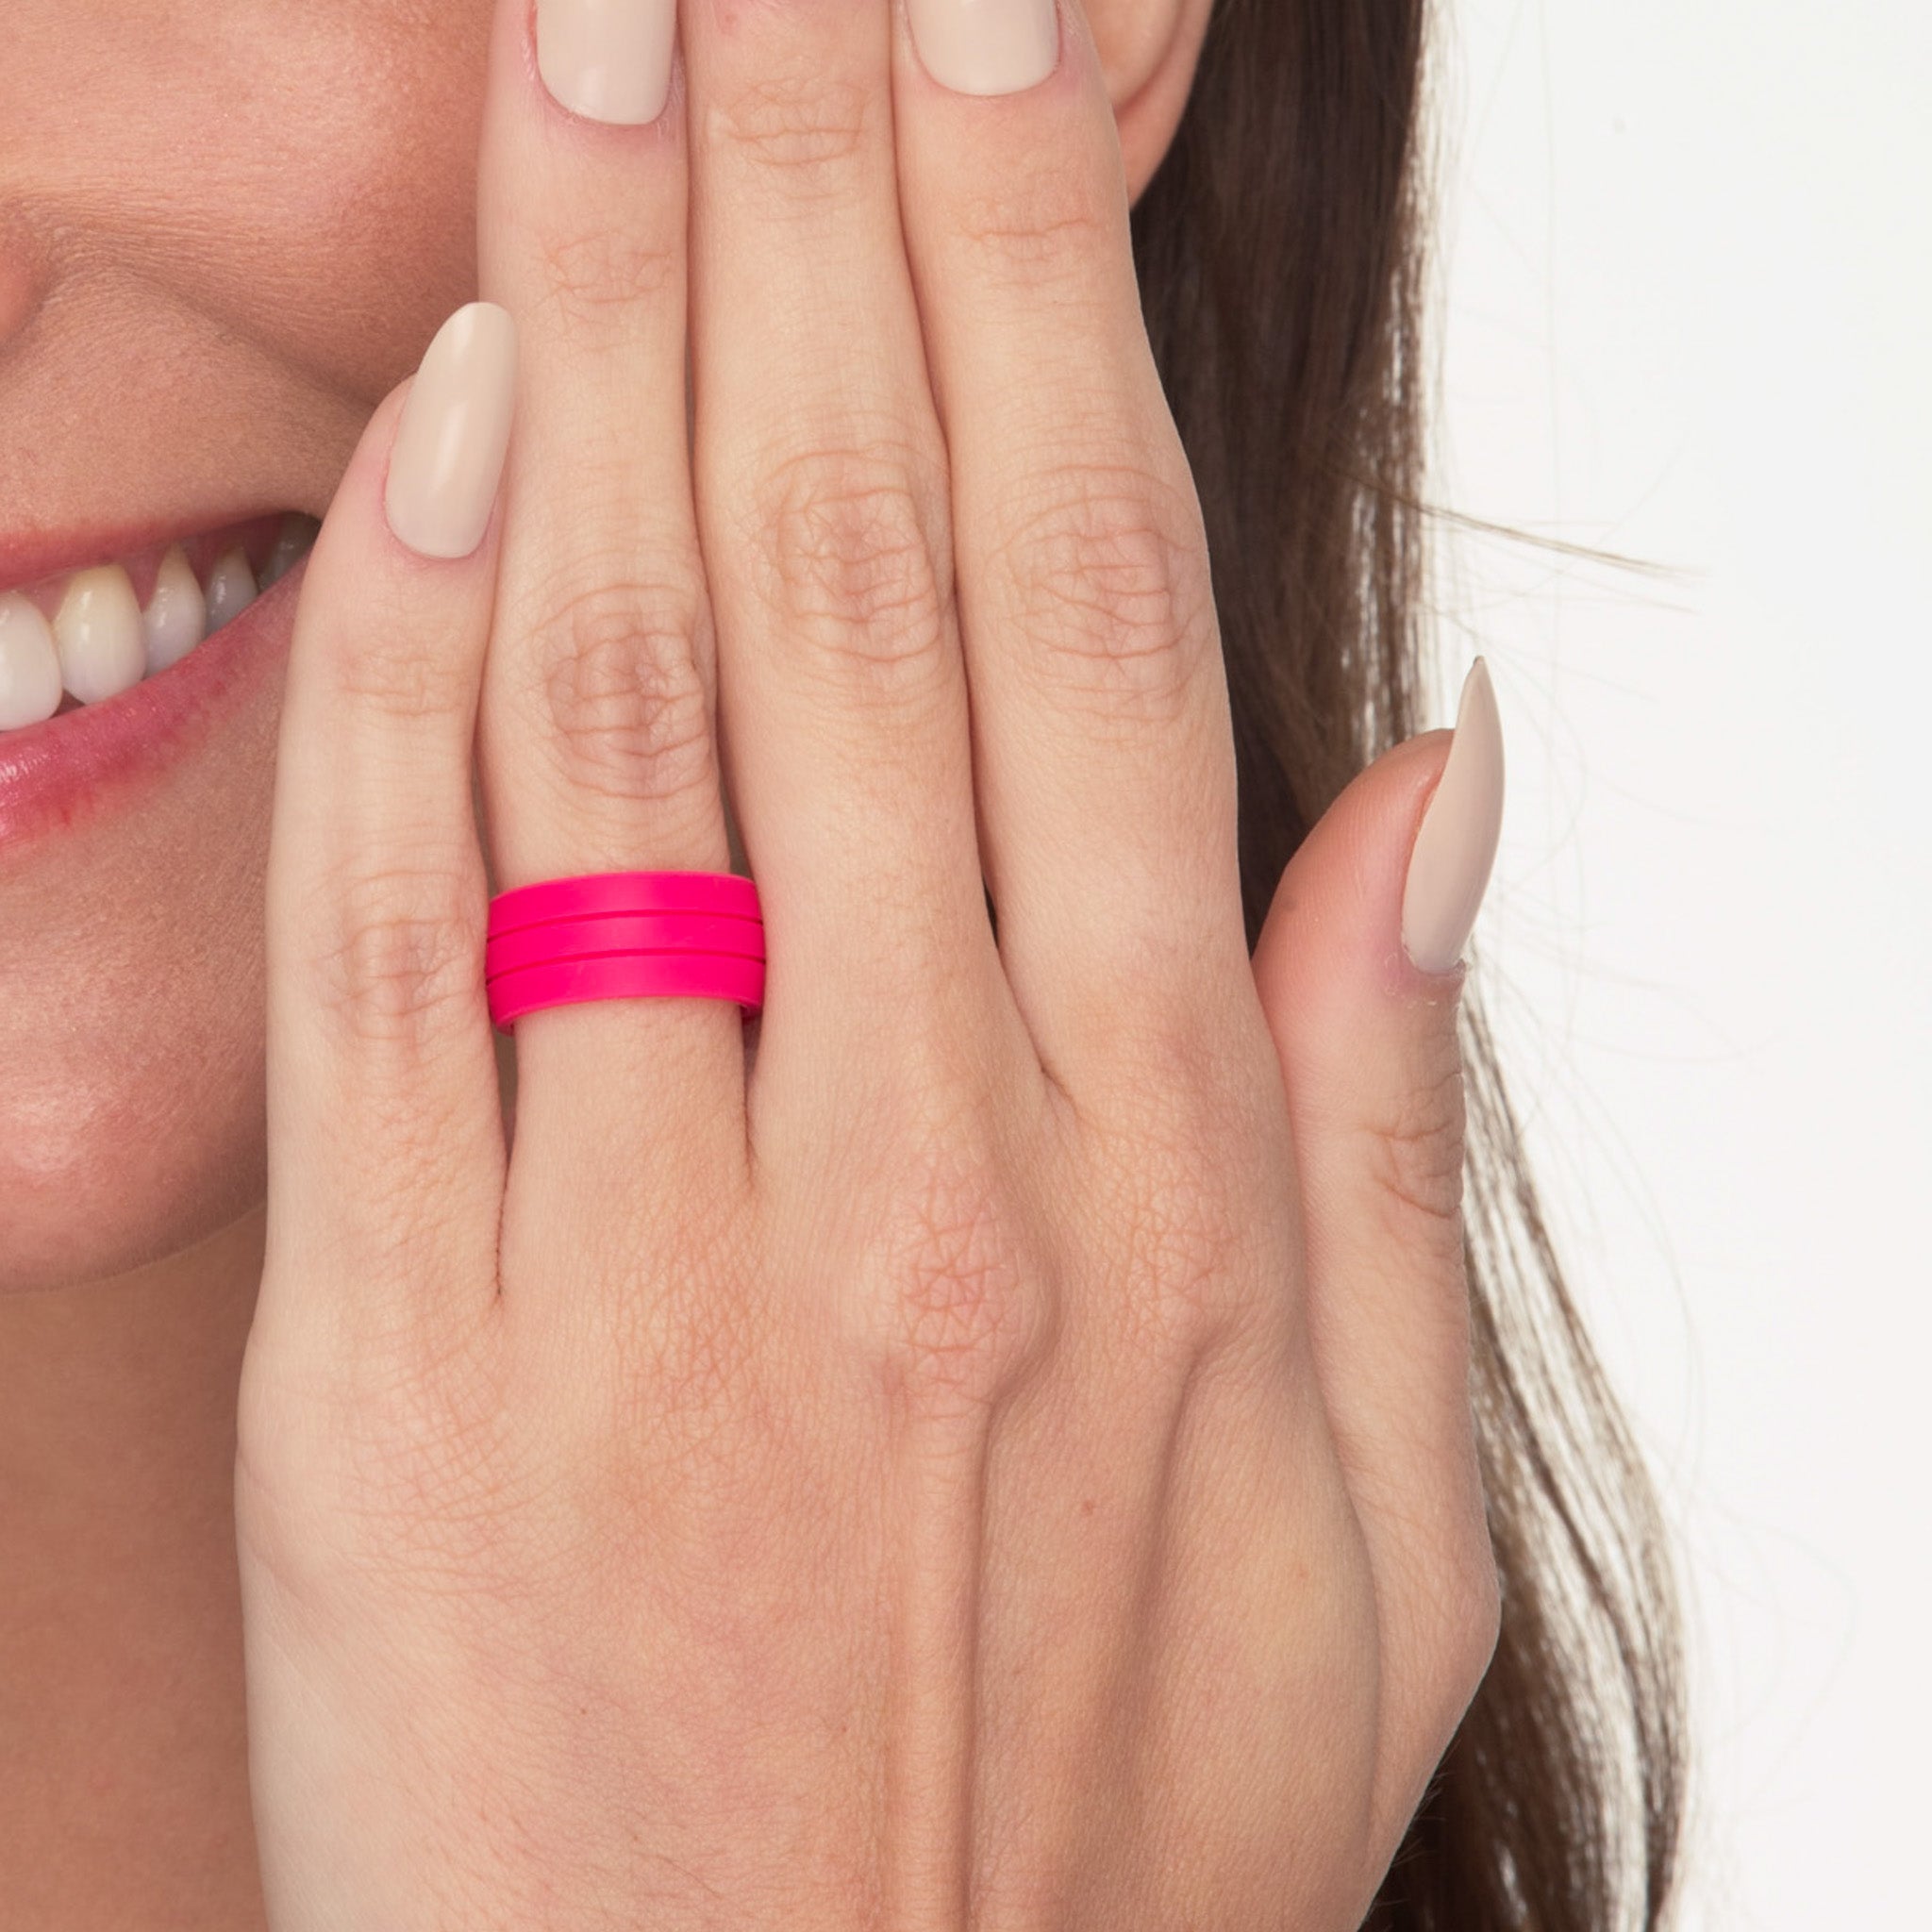 The Blossom - Silicone Ring